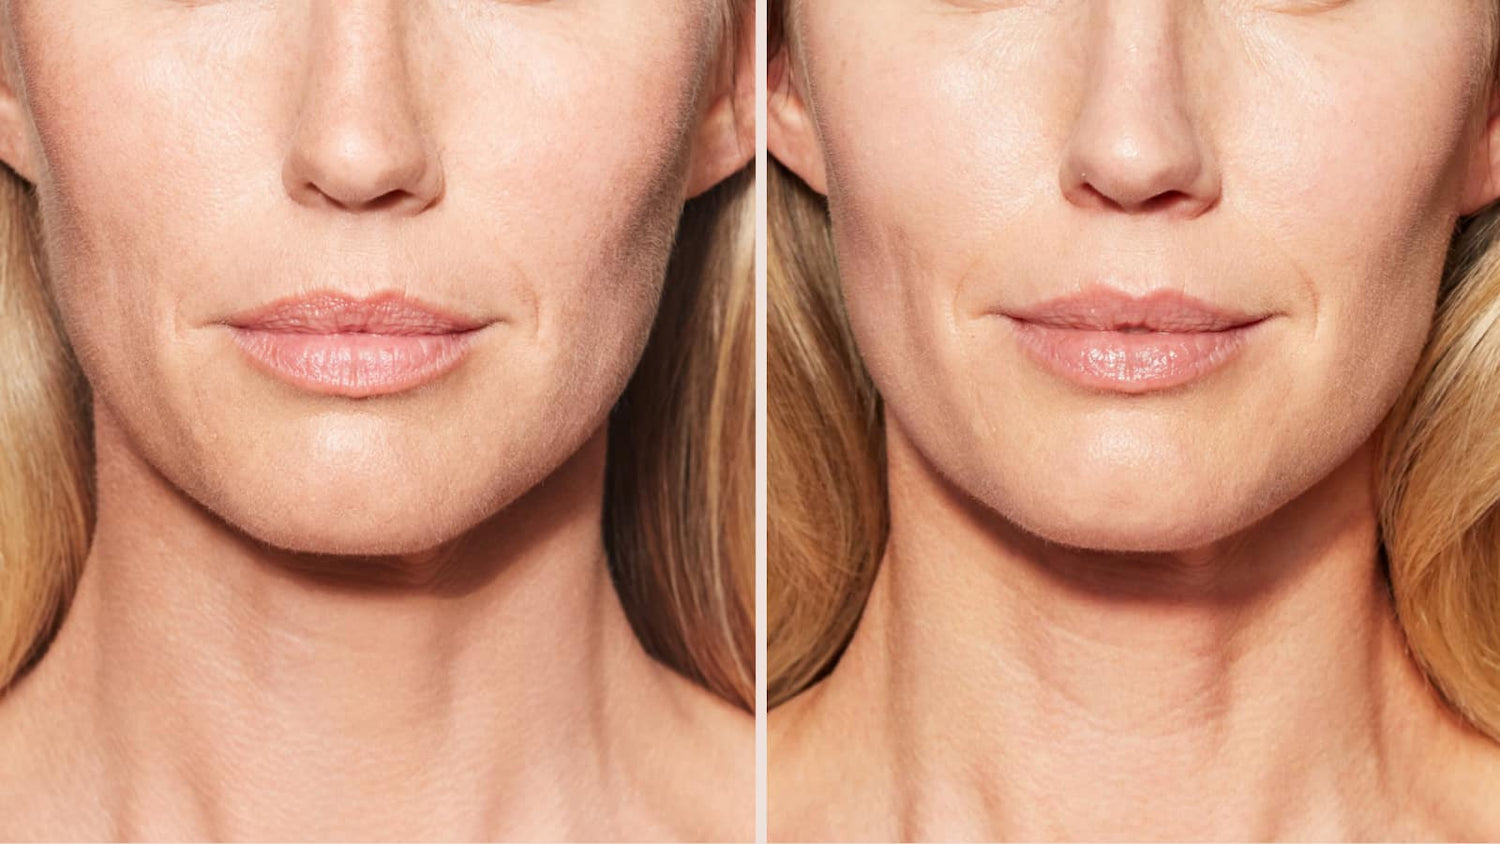 A before-and-after picture after Sculptra treatment